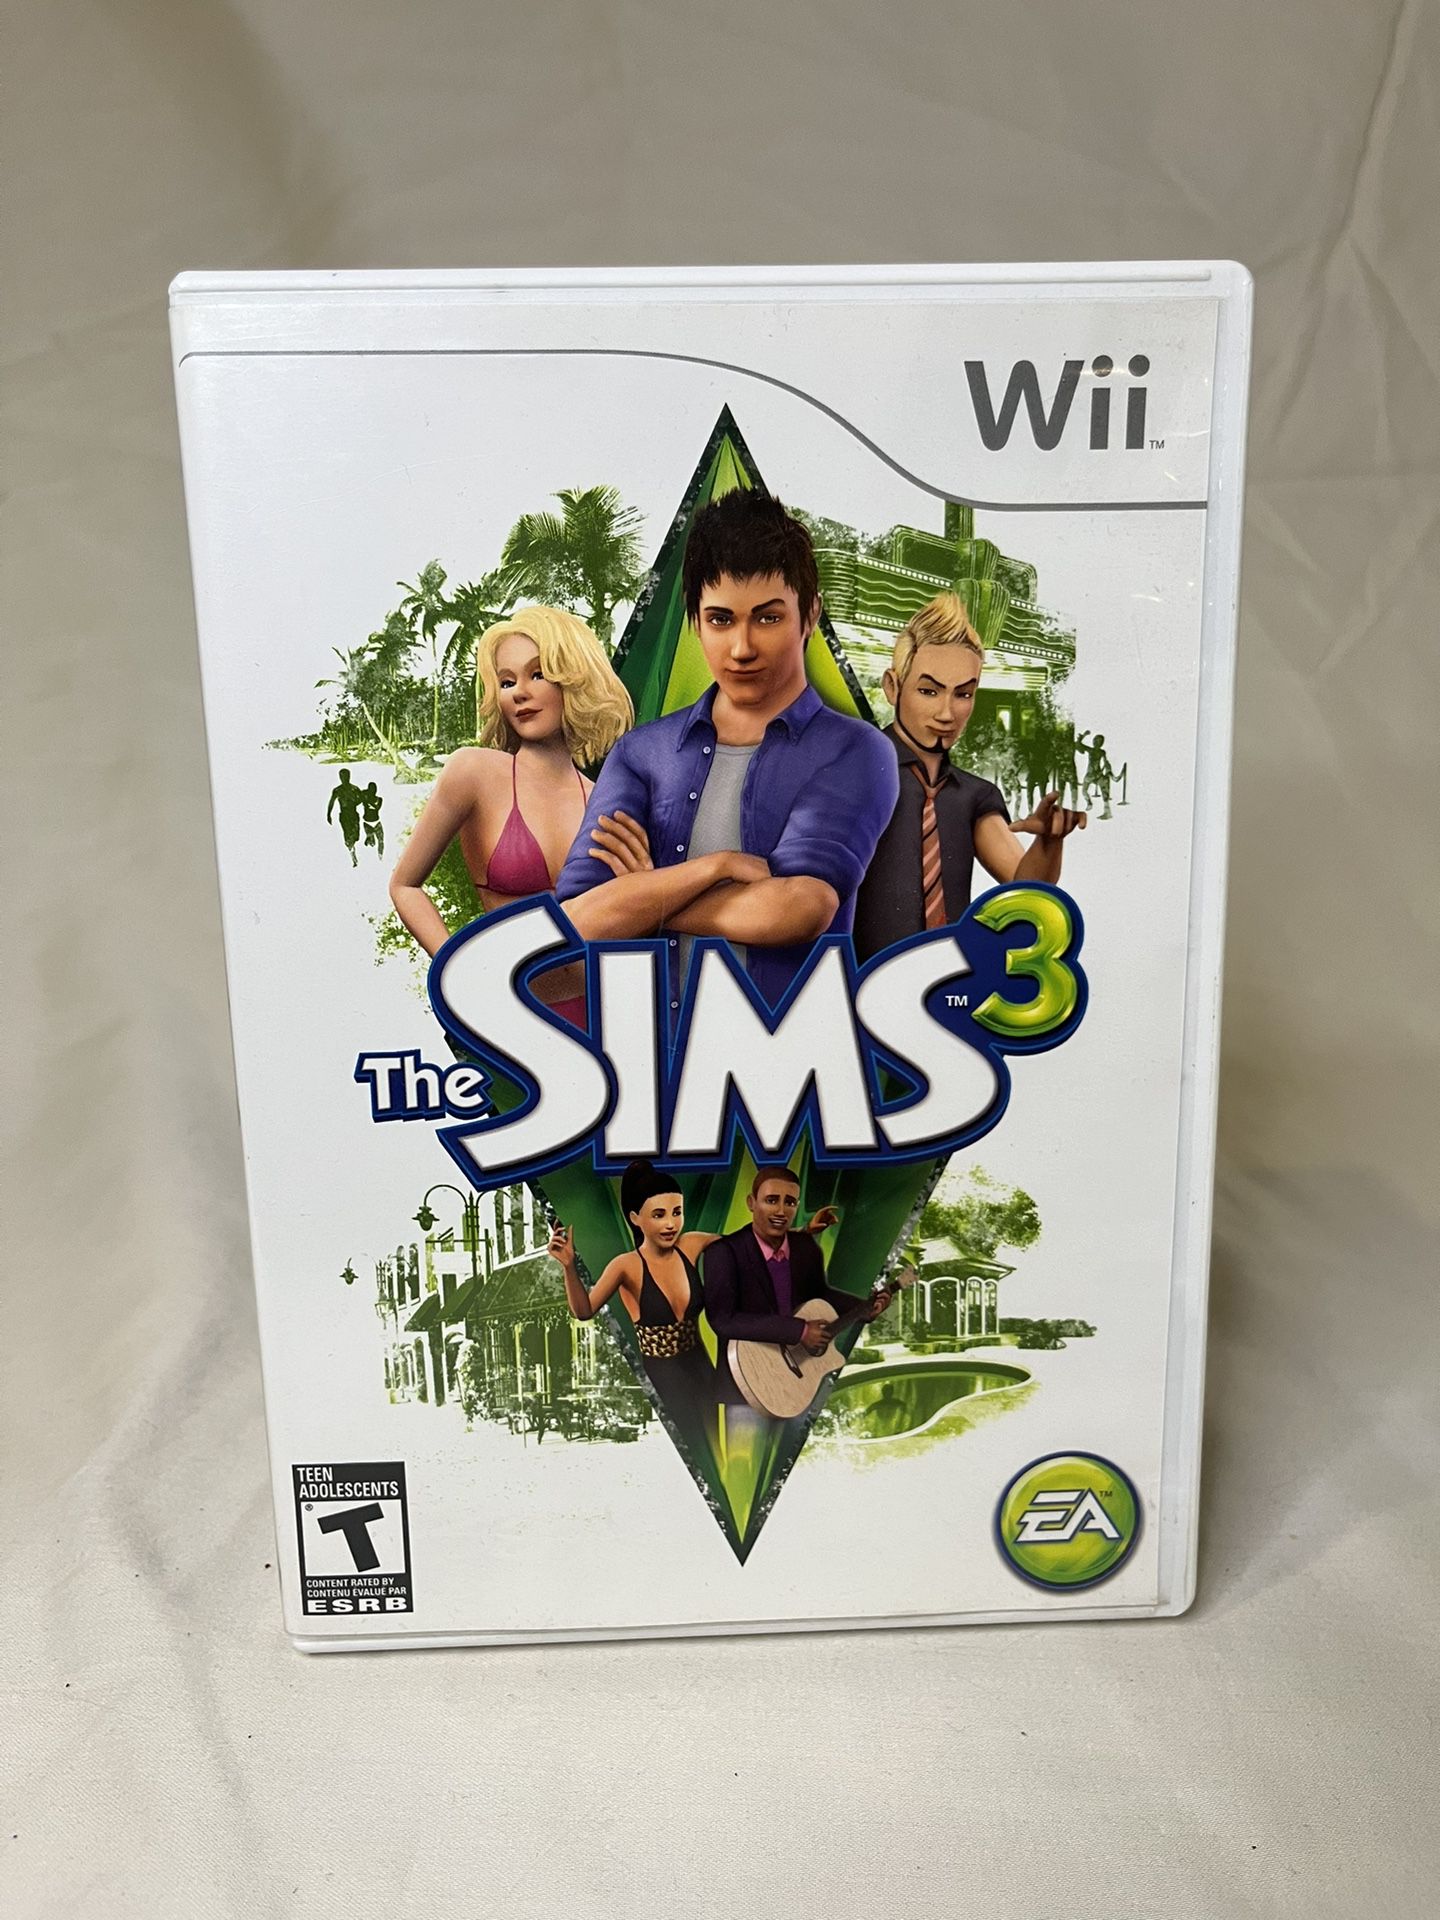 Sims 3 Wii Game